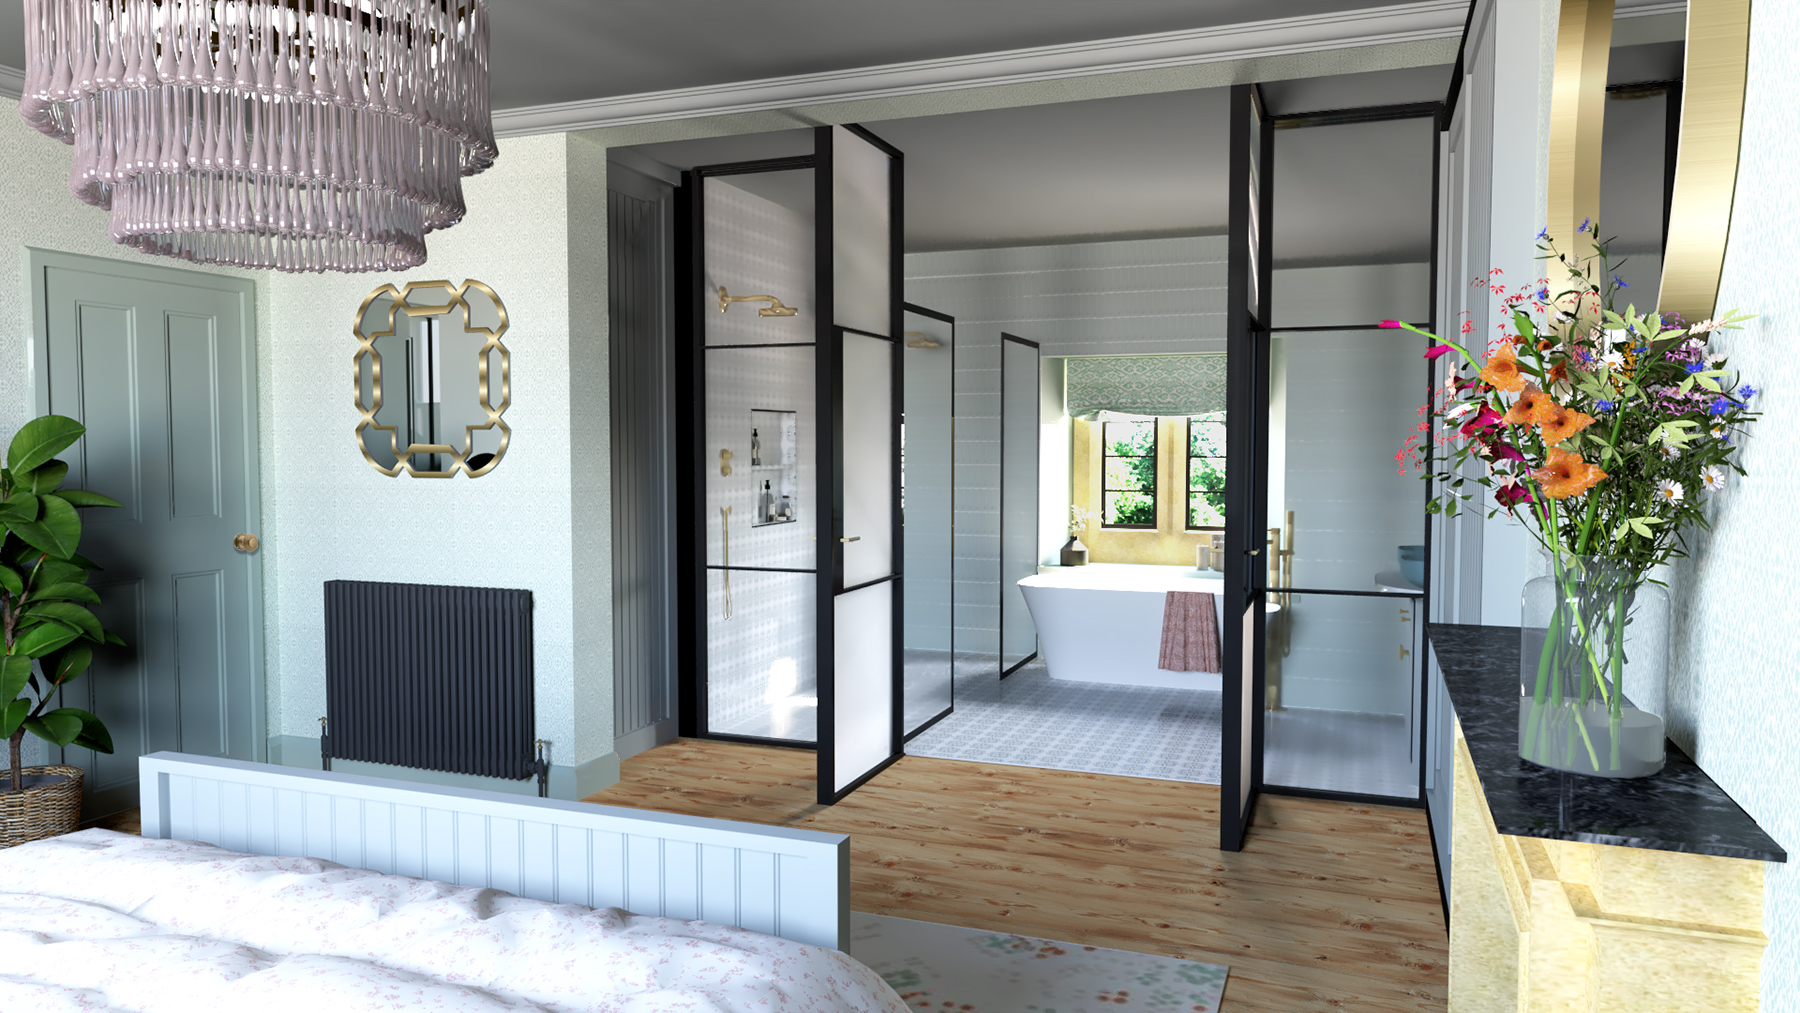 A computer generated render of the design showing the view from the bed towards the en suite.